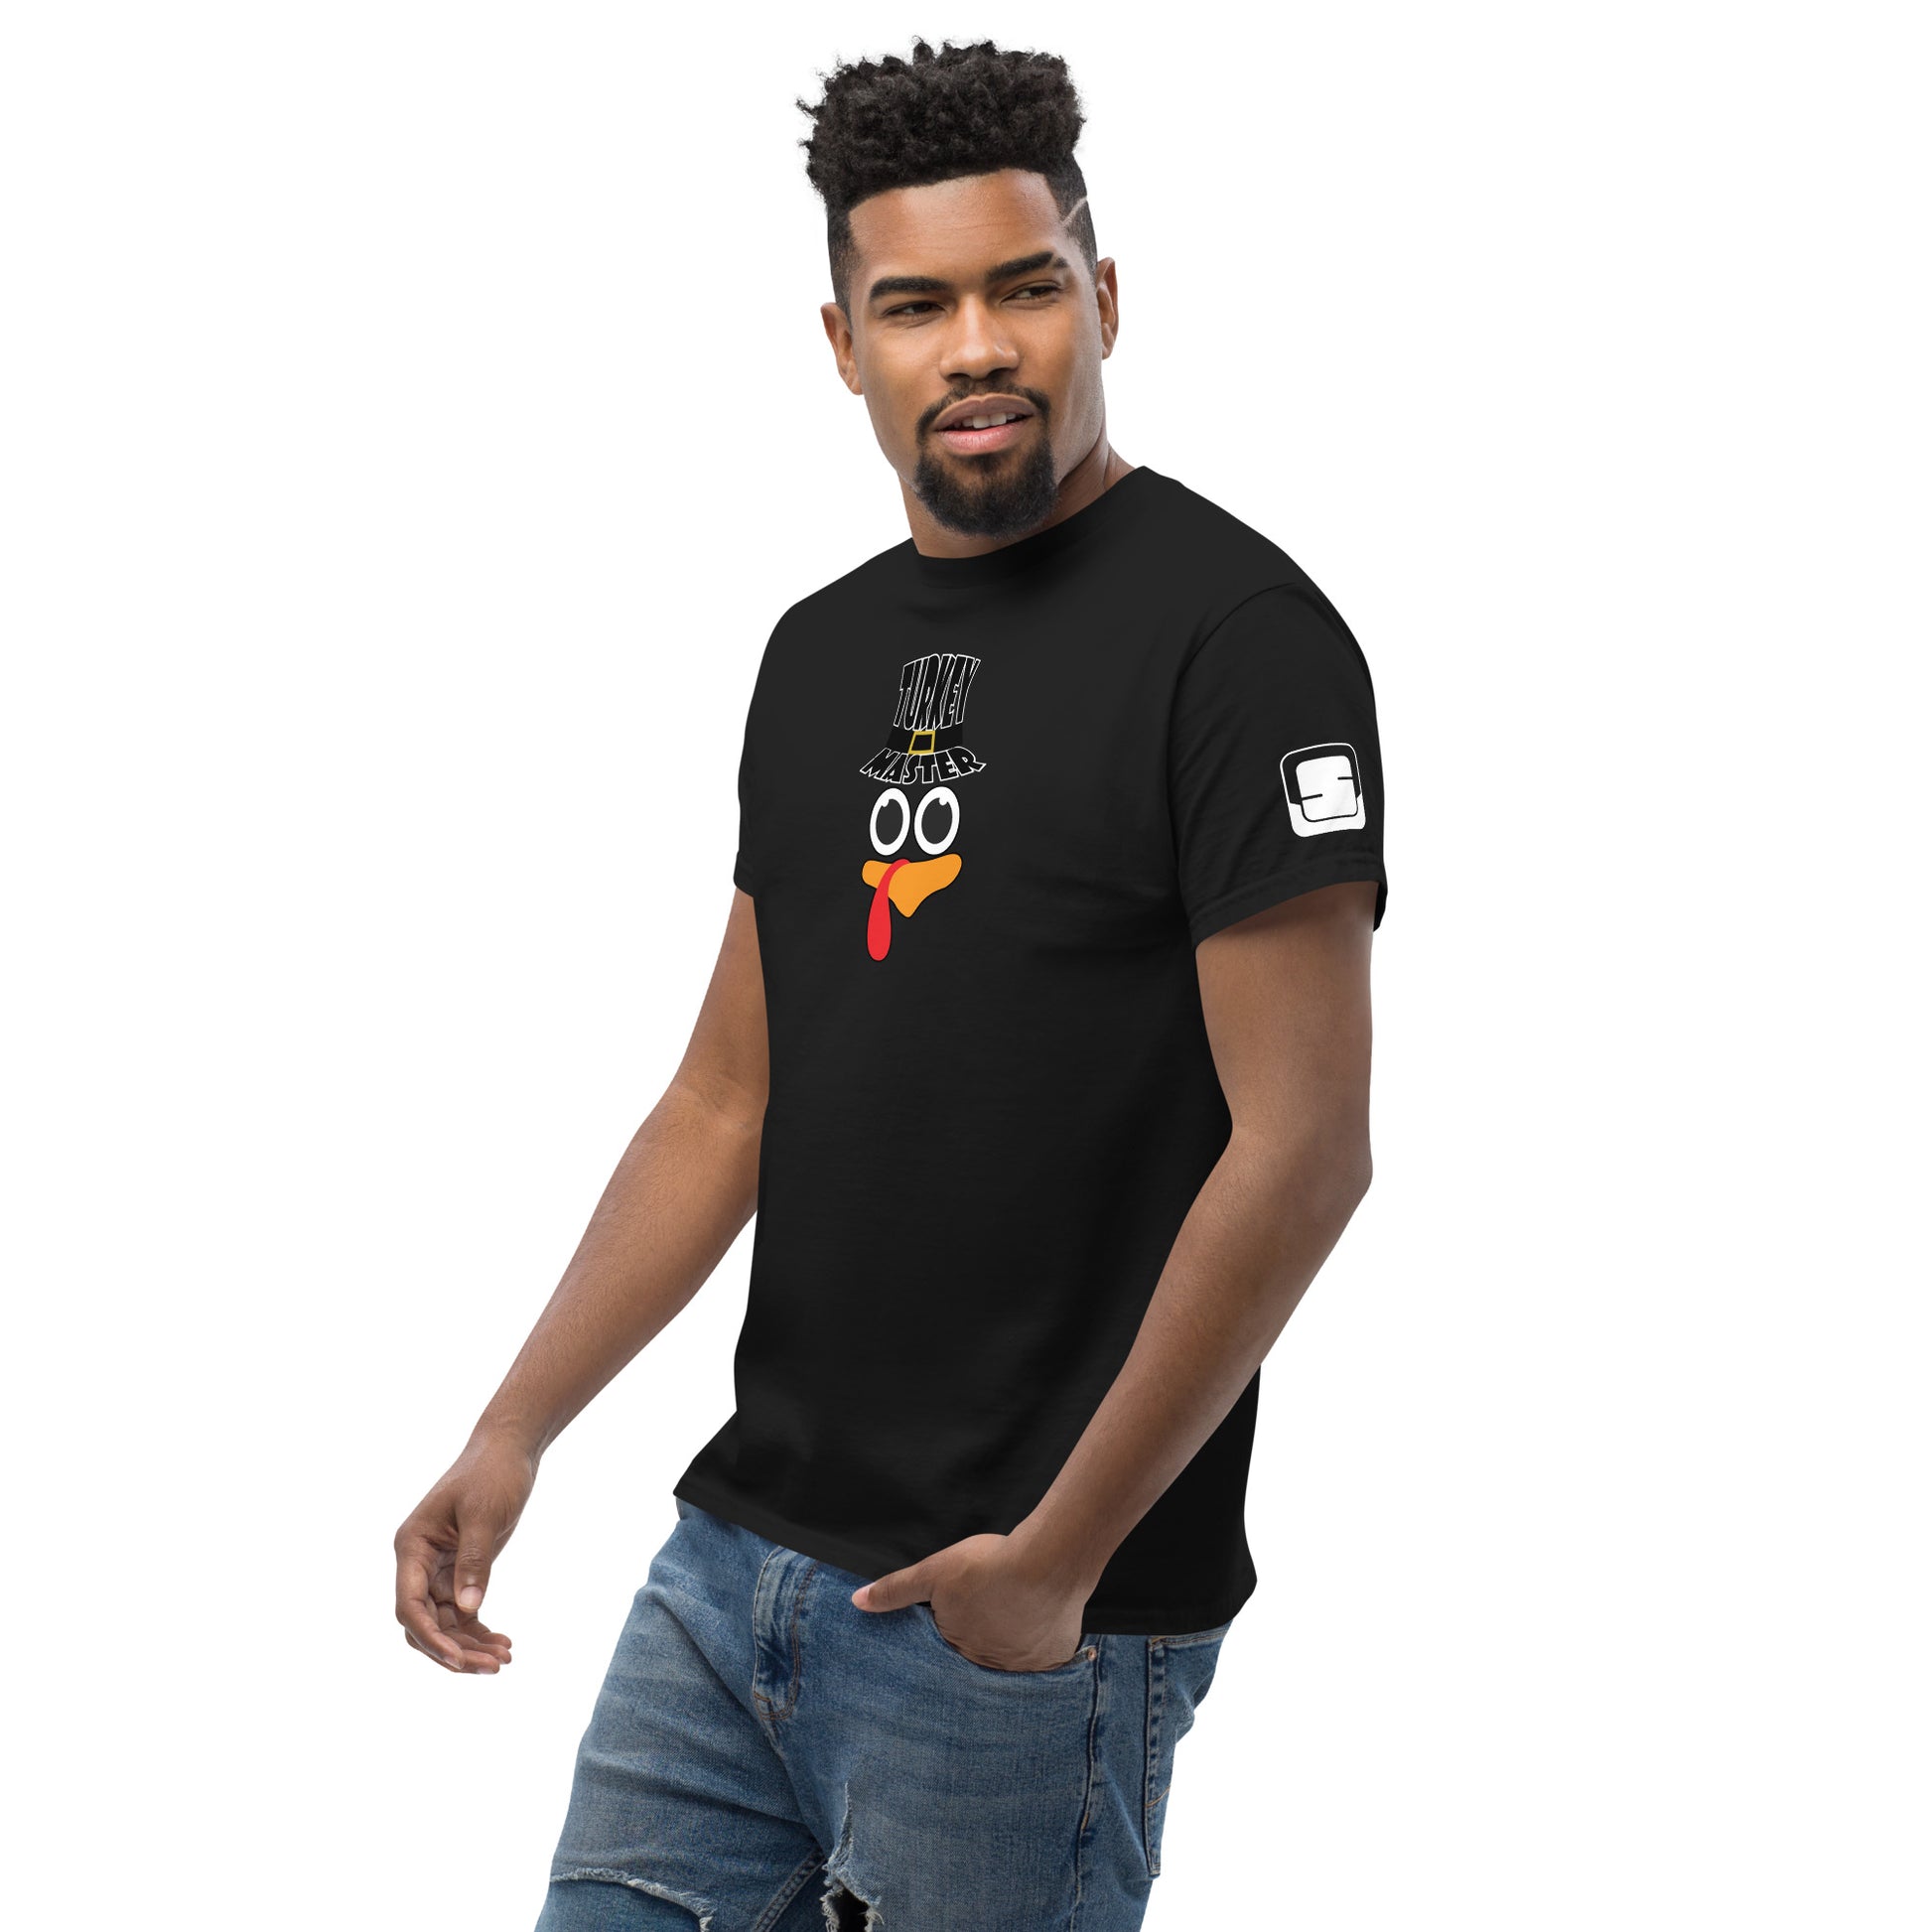 A man with a neatly trimmed beard and curly hairstyle is wearing a black t-shirt featuring a playful turkey graphic. The turkey has cartoonish eyes, an orange beak, and a red snood, along with a black hat that reads "TURKEY MASTER" in bold letters. The left sleeve features a distinctive rectangular logo patch. The man is standing in a casual pose, smiling confidently, with one hand in his pocket. He is wearing distressed jeans, and the background is white.